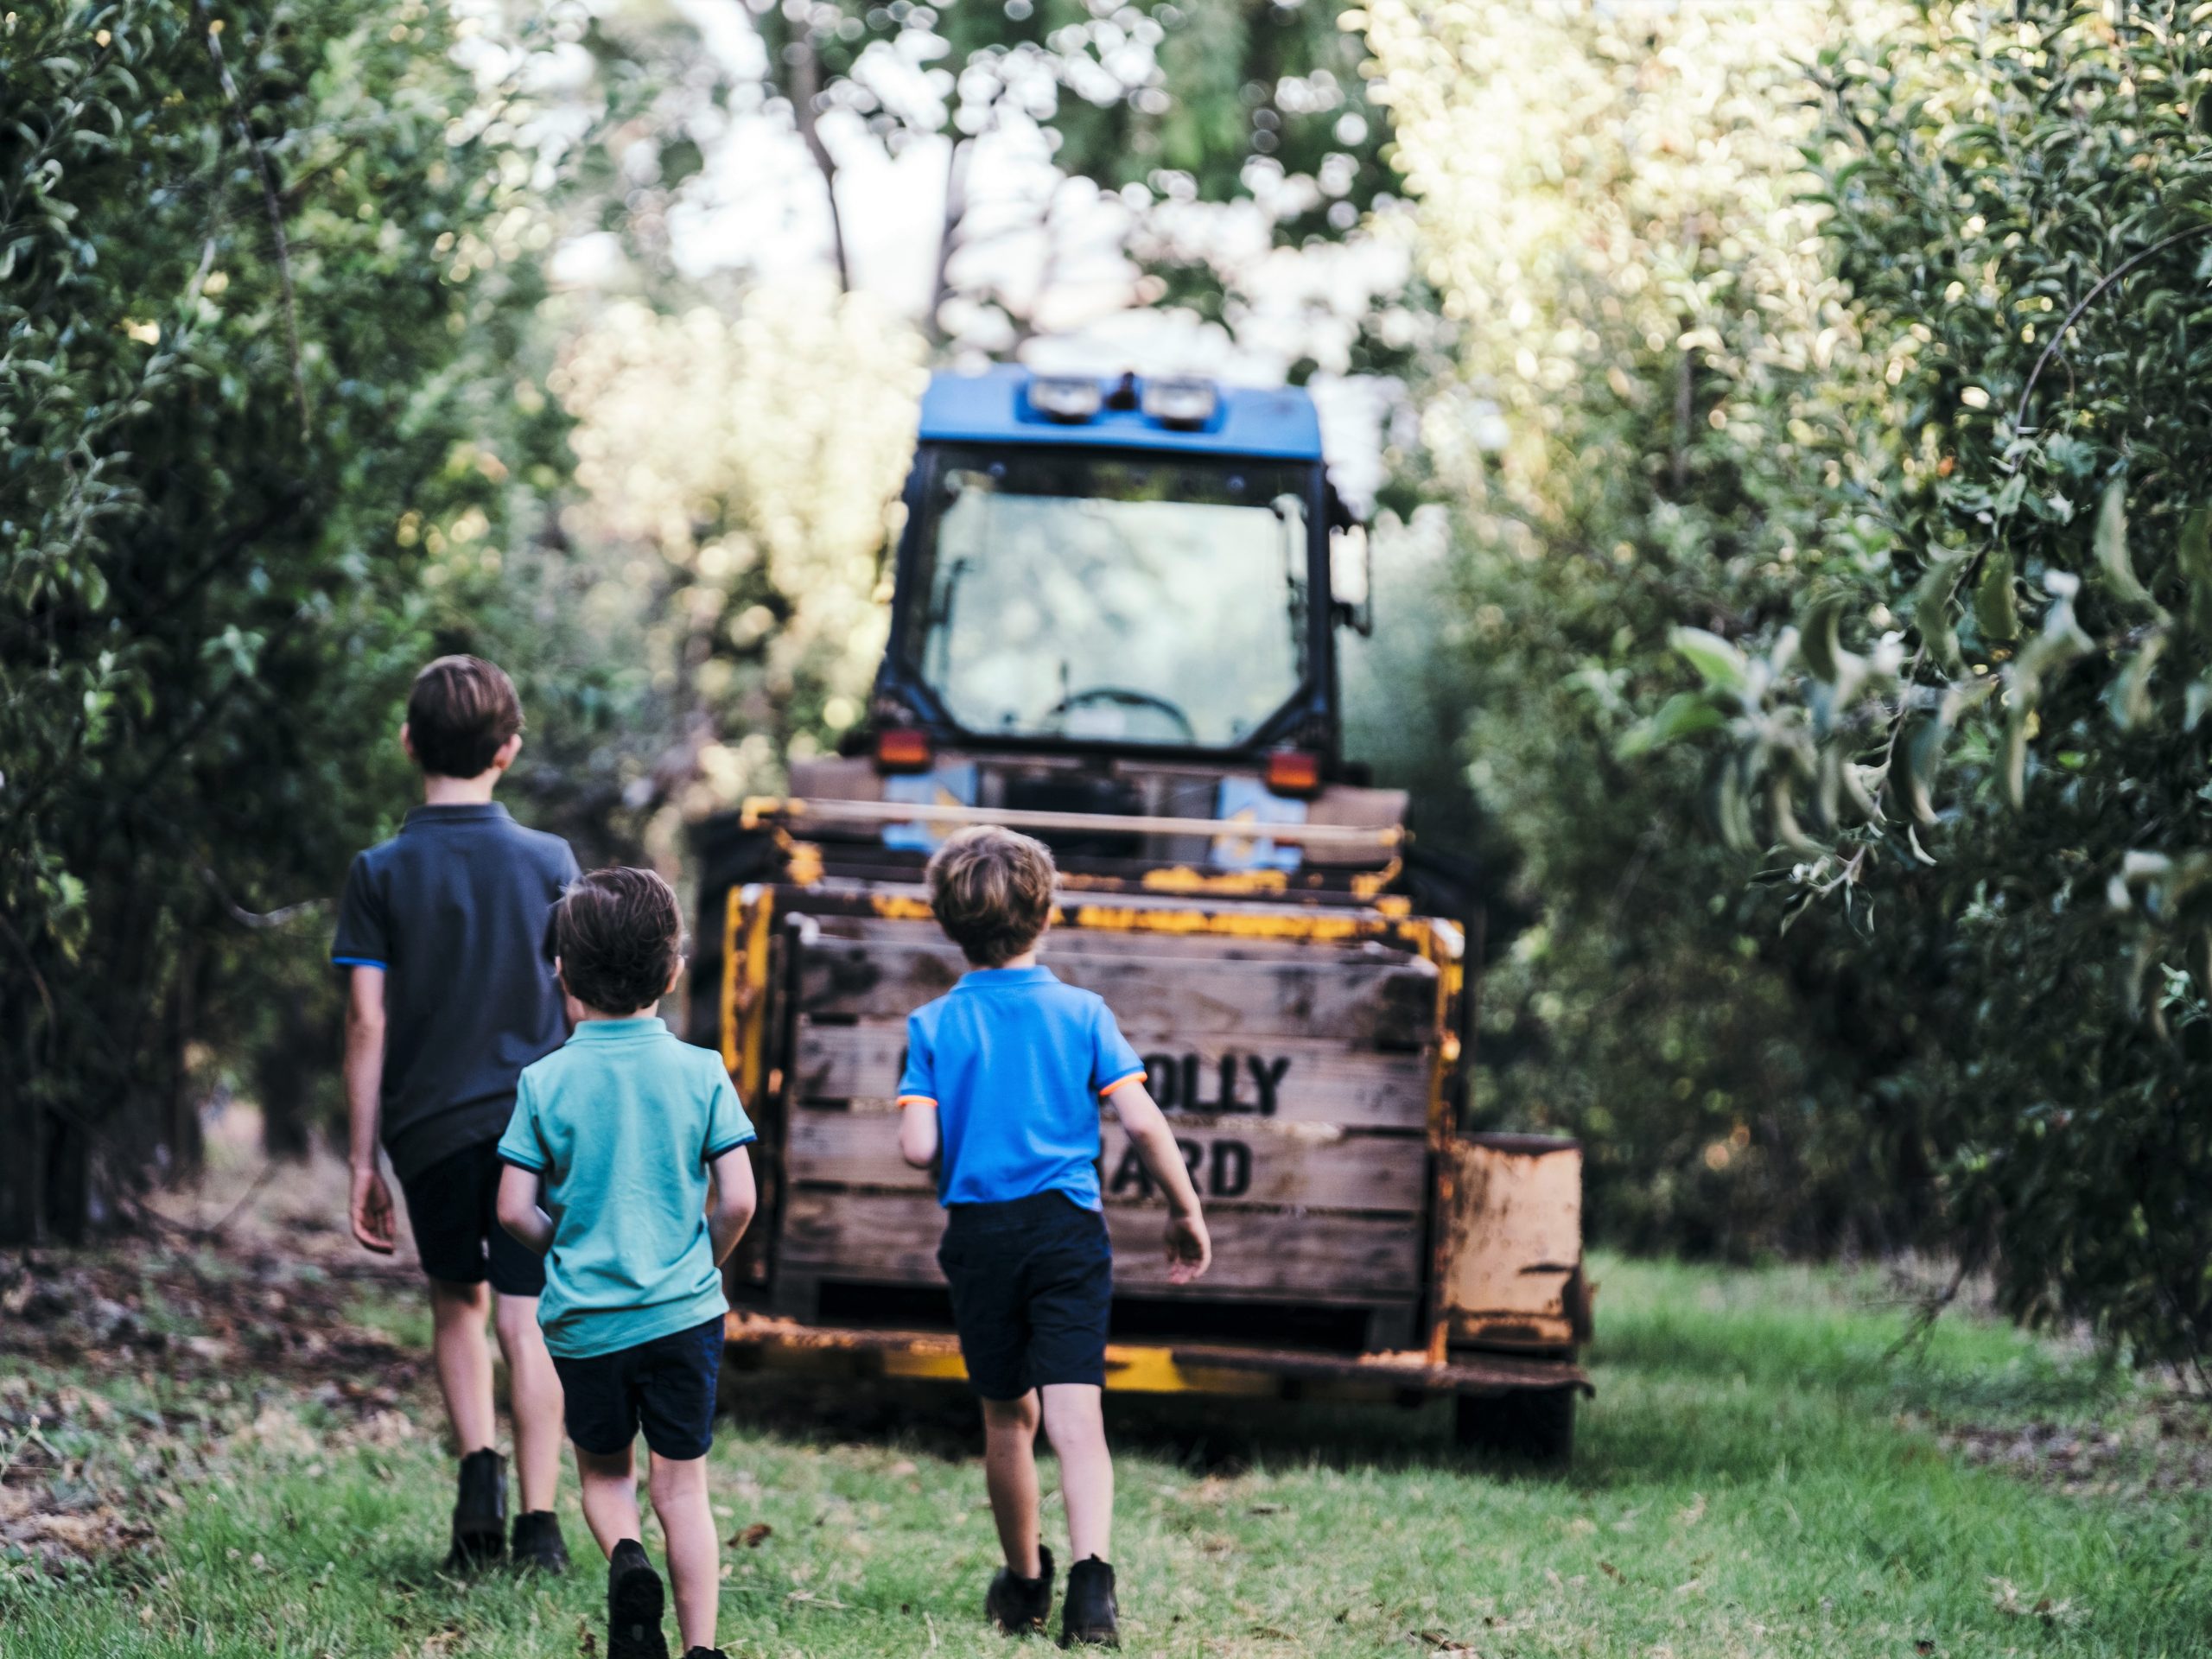 Western Australia's new agrifood network aims to ‘connect, inspire and educate’ local food producers and manufacturers to drive the development of a progressive, sustainable agrifood sector for the state.